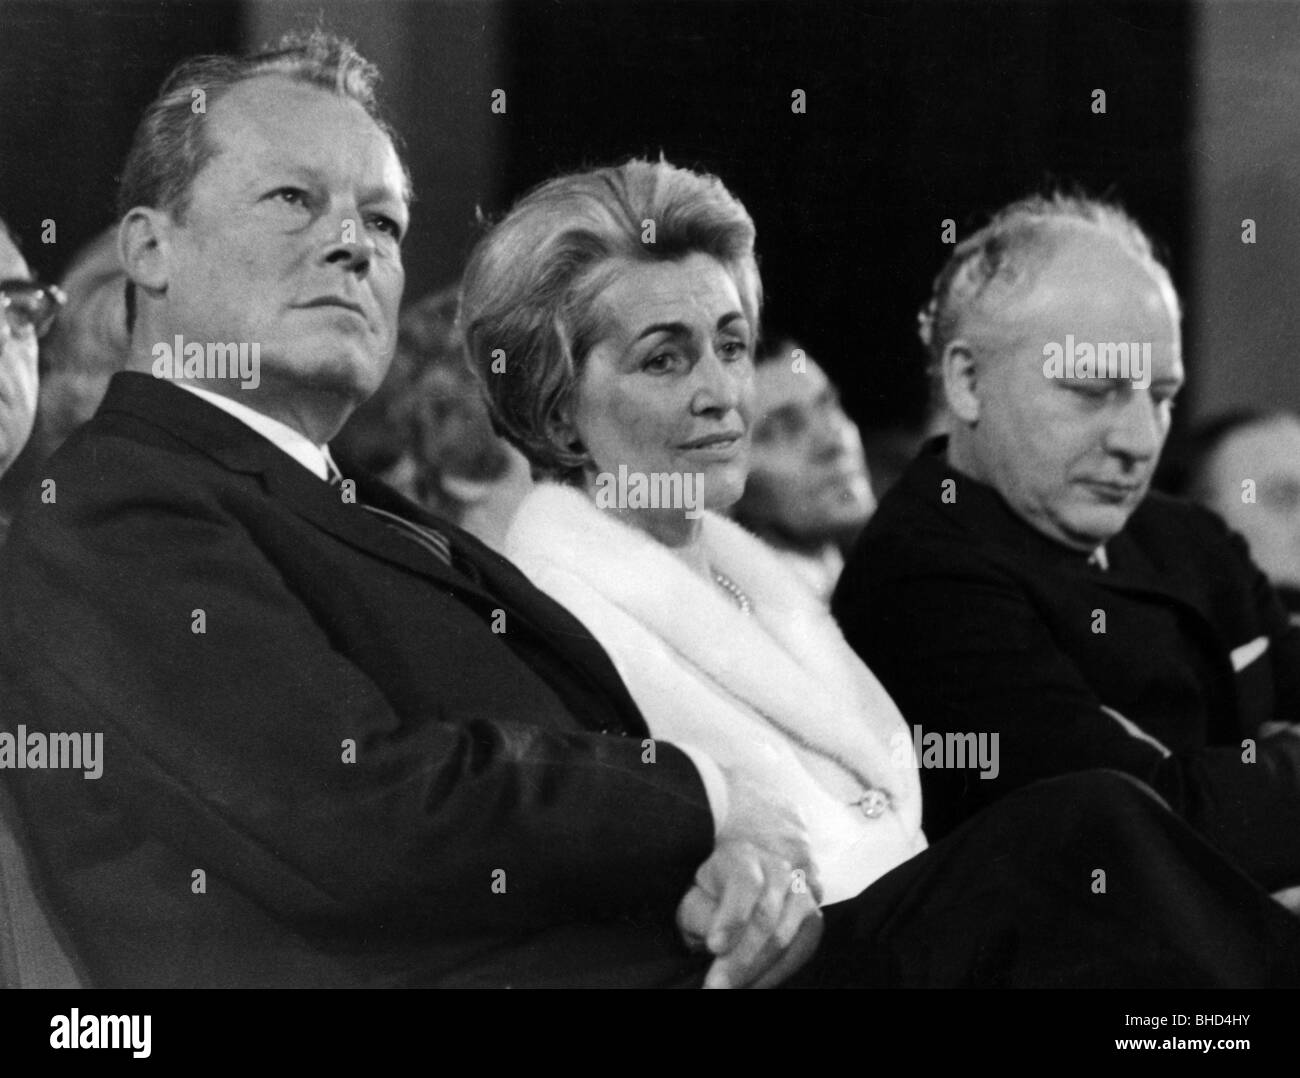 Hamm-Bruecher, Hildegard, * 11.5.1921, German politician (FDP), half length, during the award of the Theodor Heuss Prize, with Willy Brand and Walter Scheel, Stock Photo